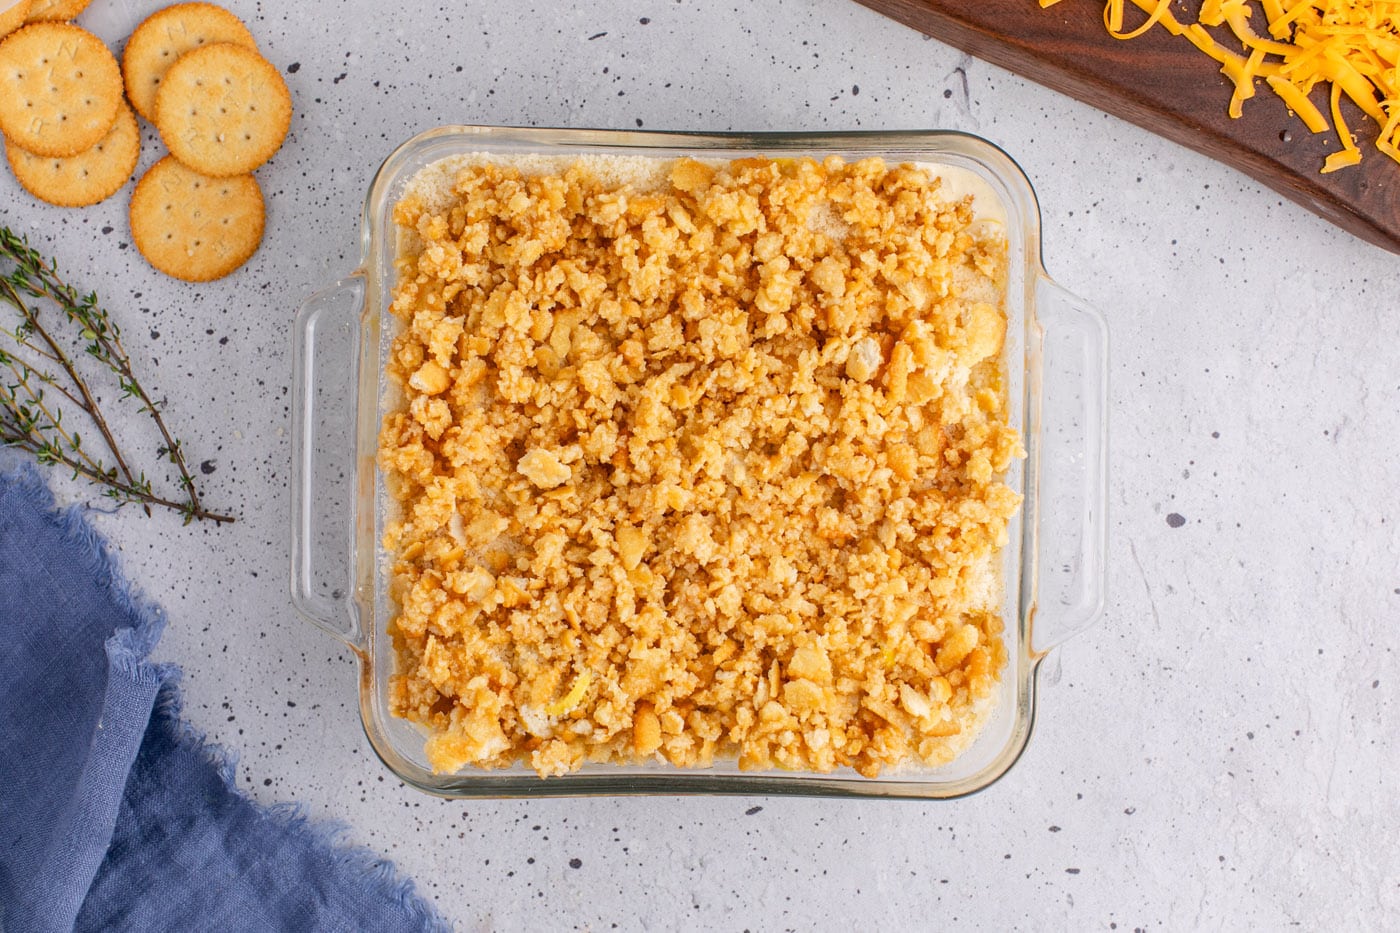 squash casserole topped with Ritz crackers